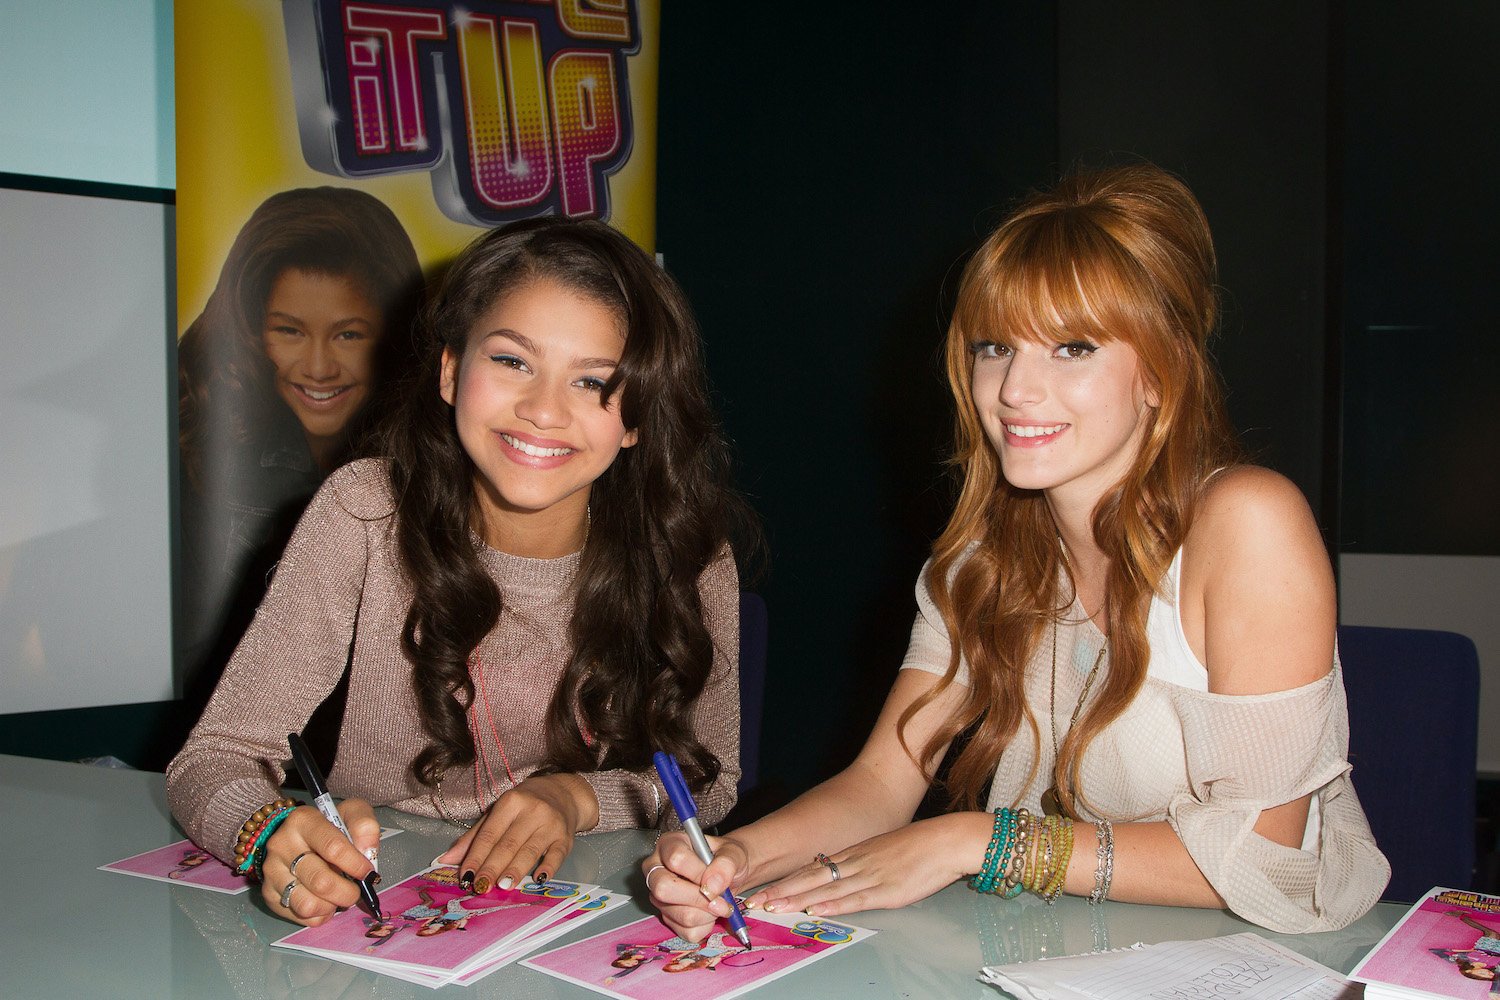 Bella Thorne and Zendaya of Disney Channel's "Shake It Up" sign autographs in London